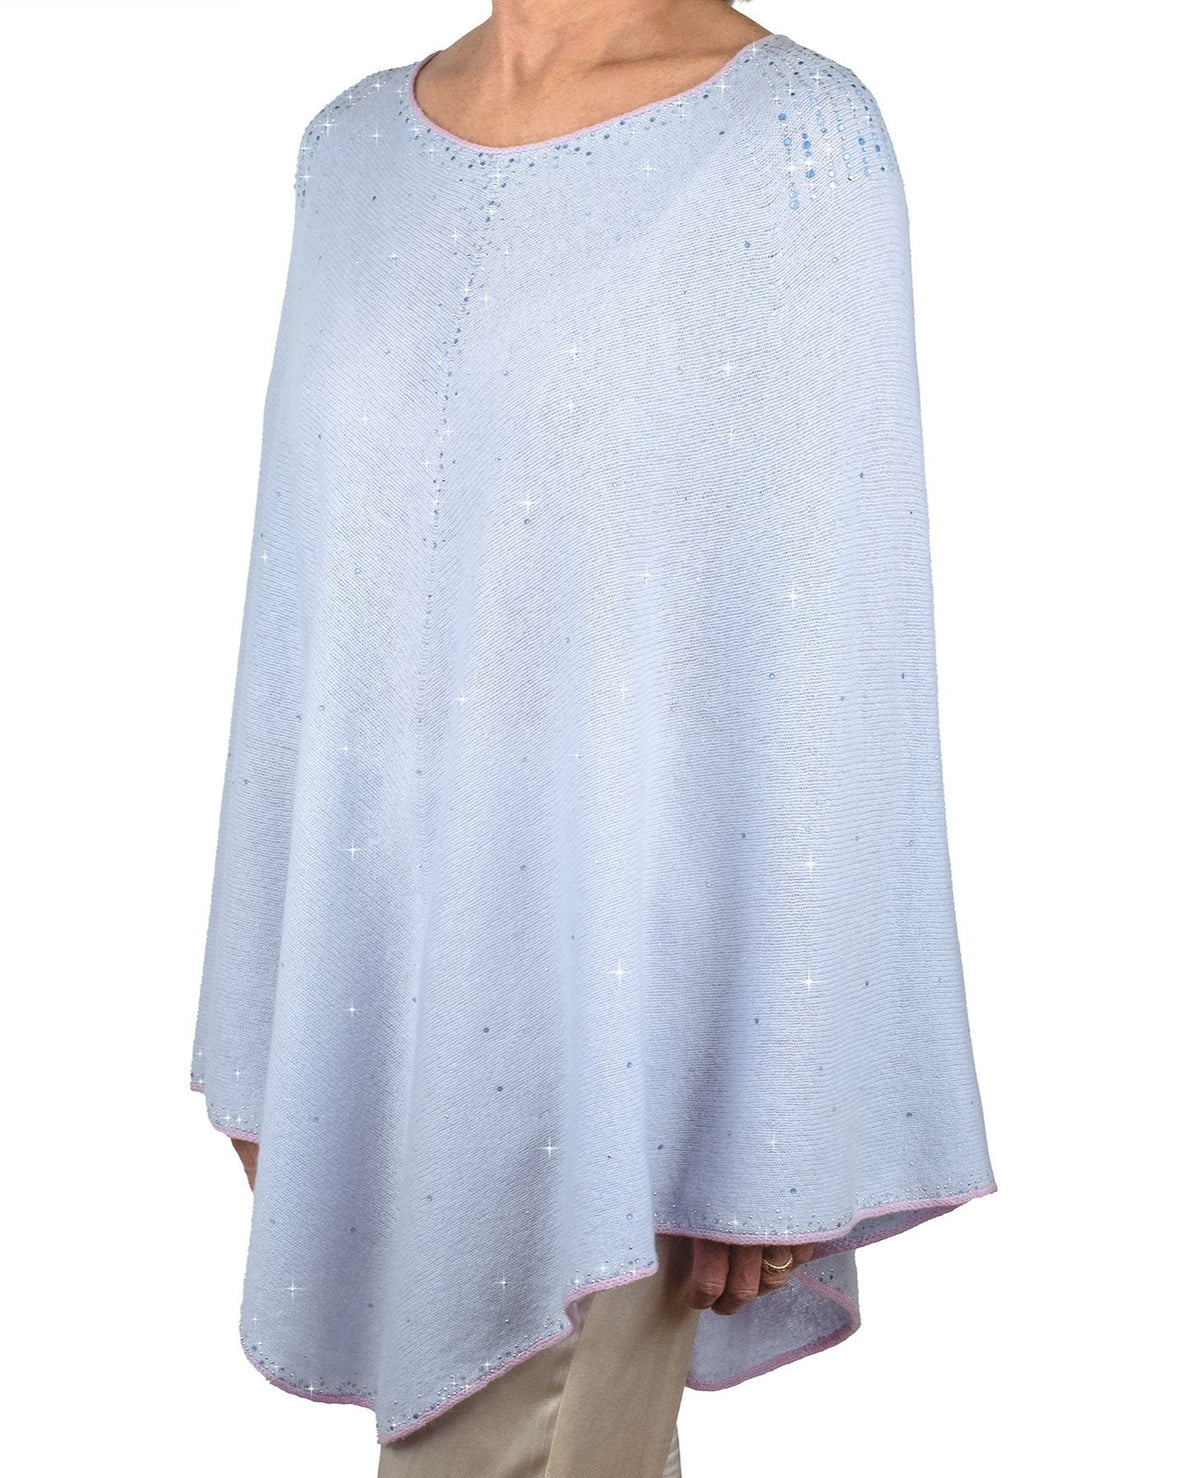 'Pale Blue' Tissue Weight Epaulette Poncho- size M/L